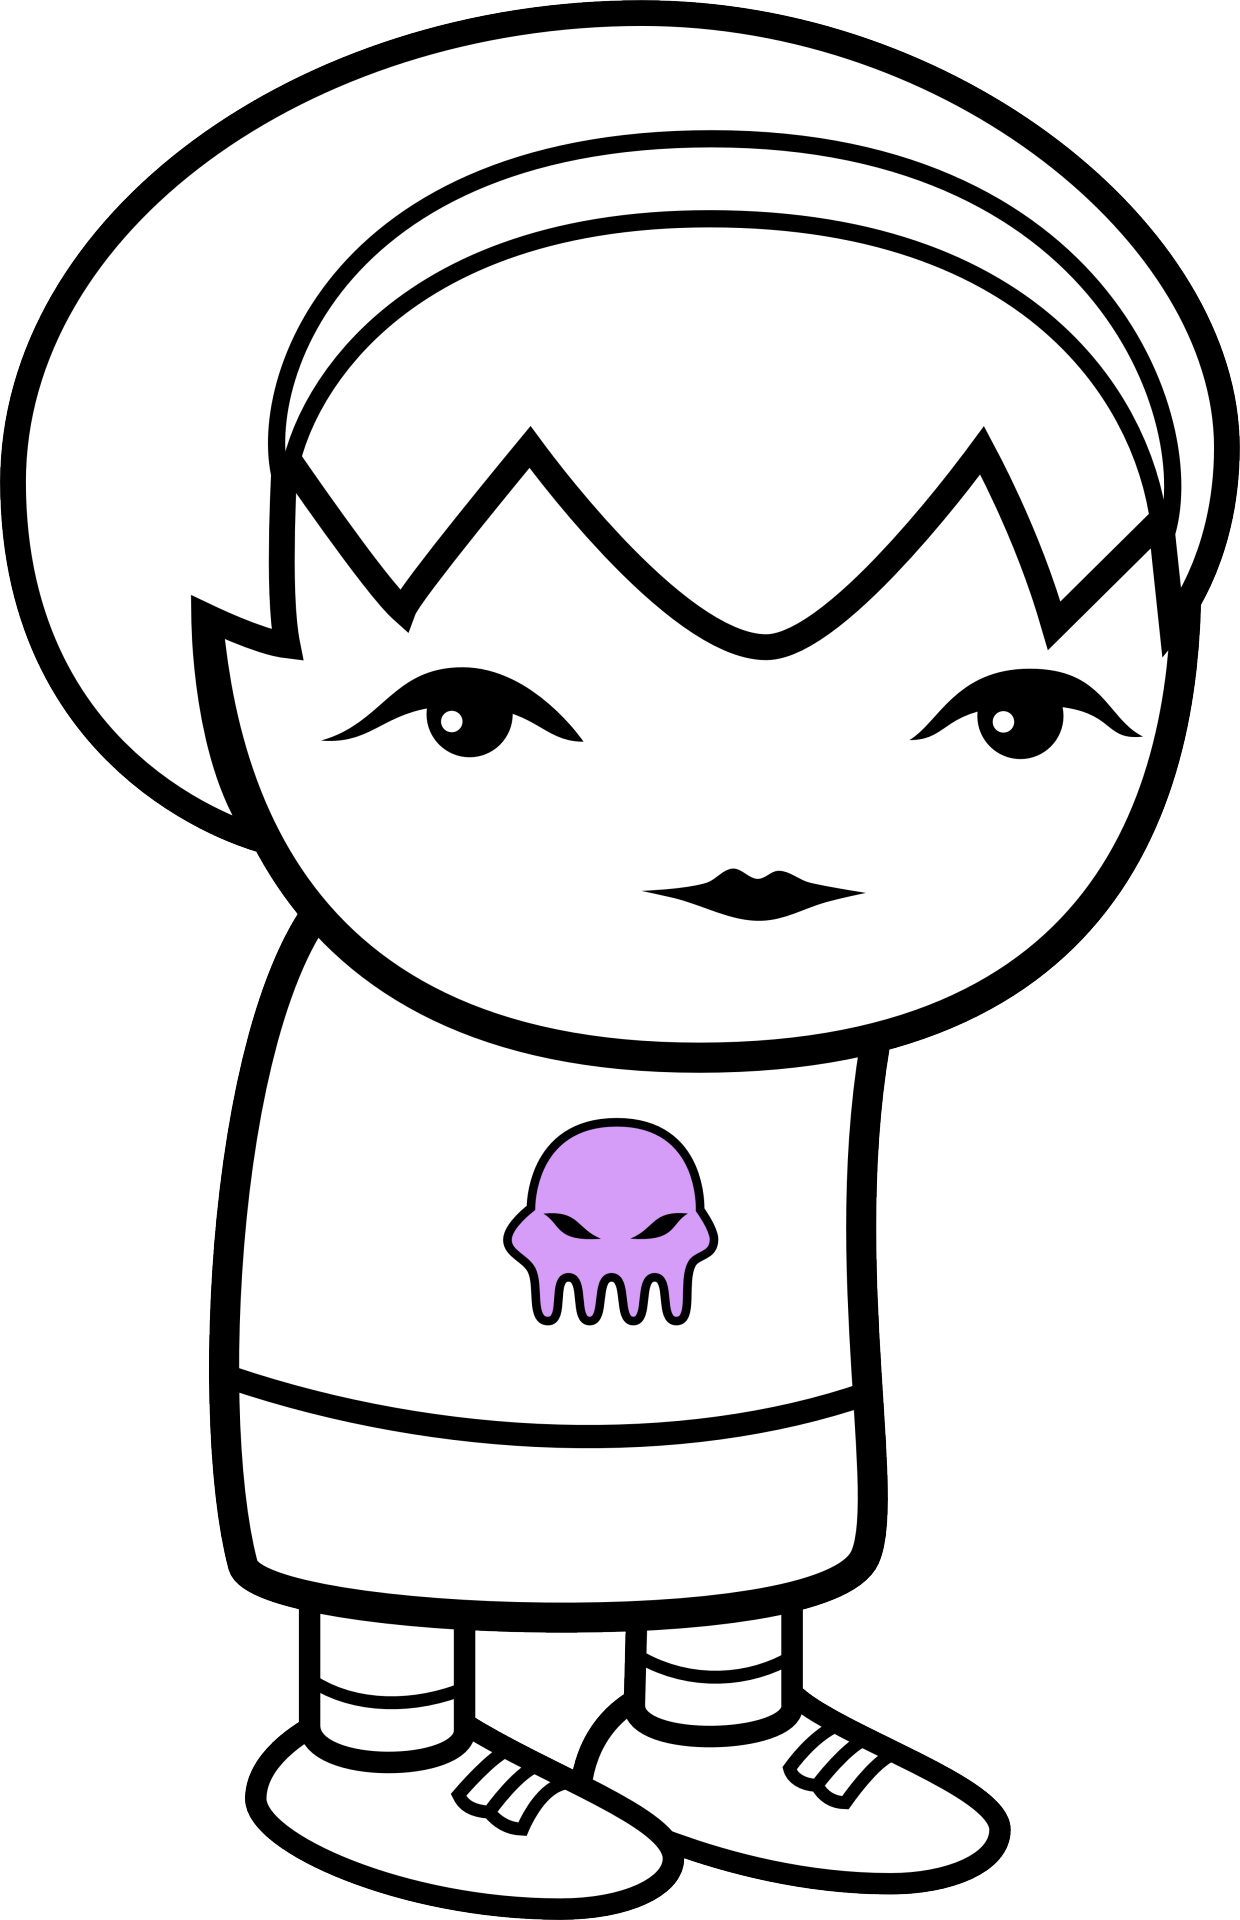 lalonde photo clipart - photo #1